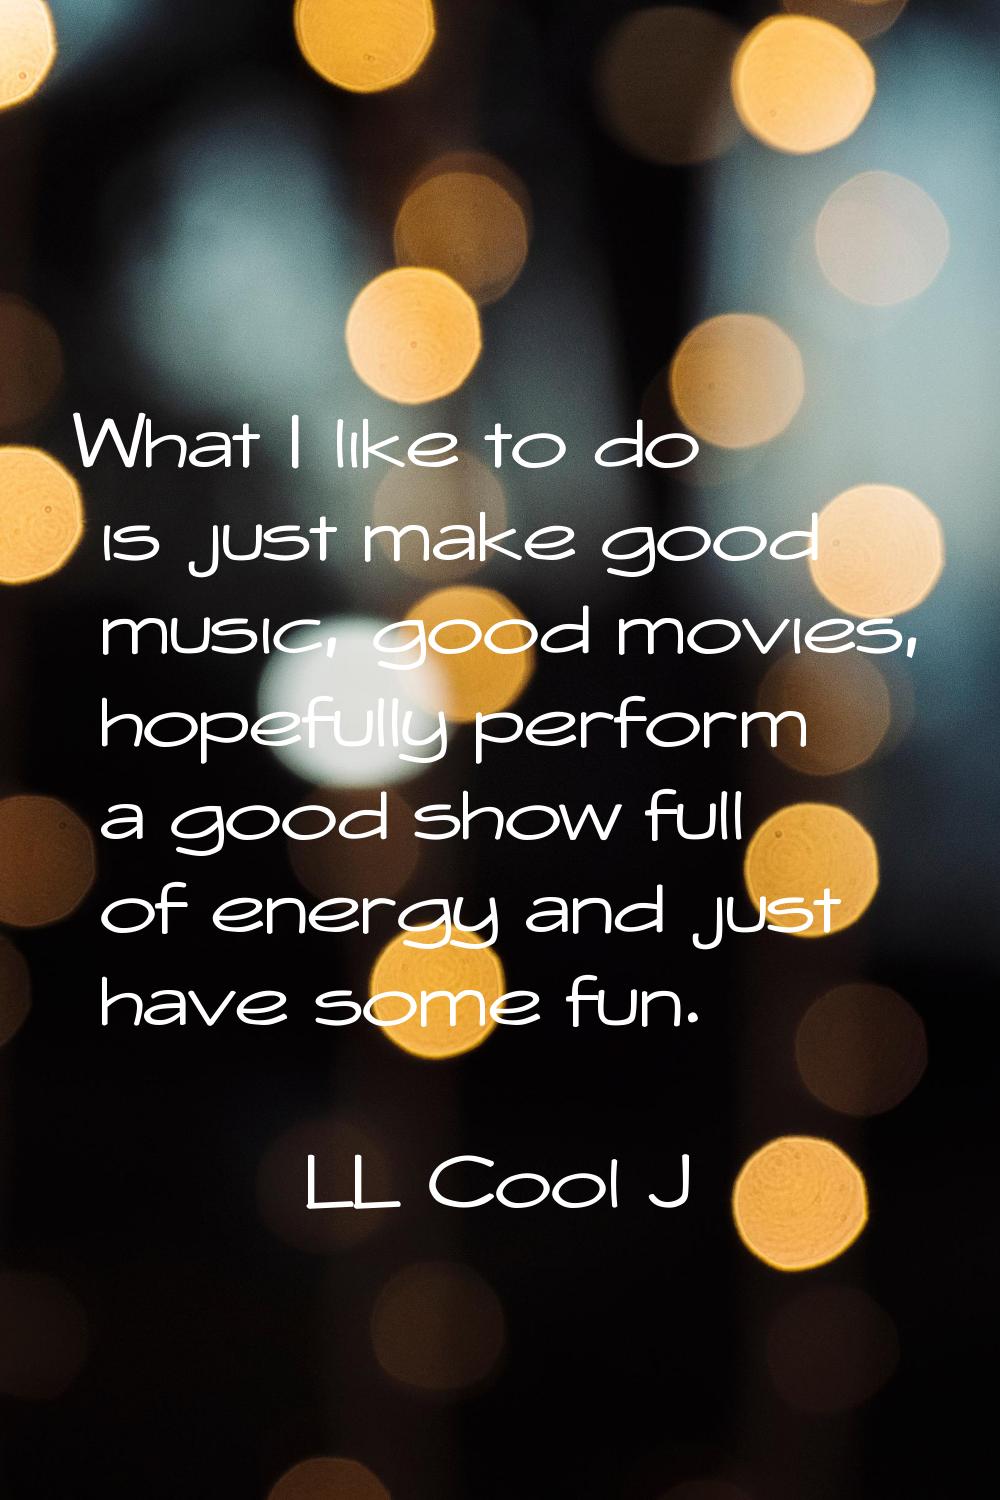 What I like to do is just make good music, good movies, hopefully perform a good show full of energ